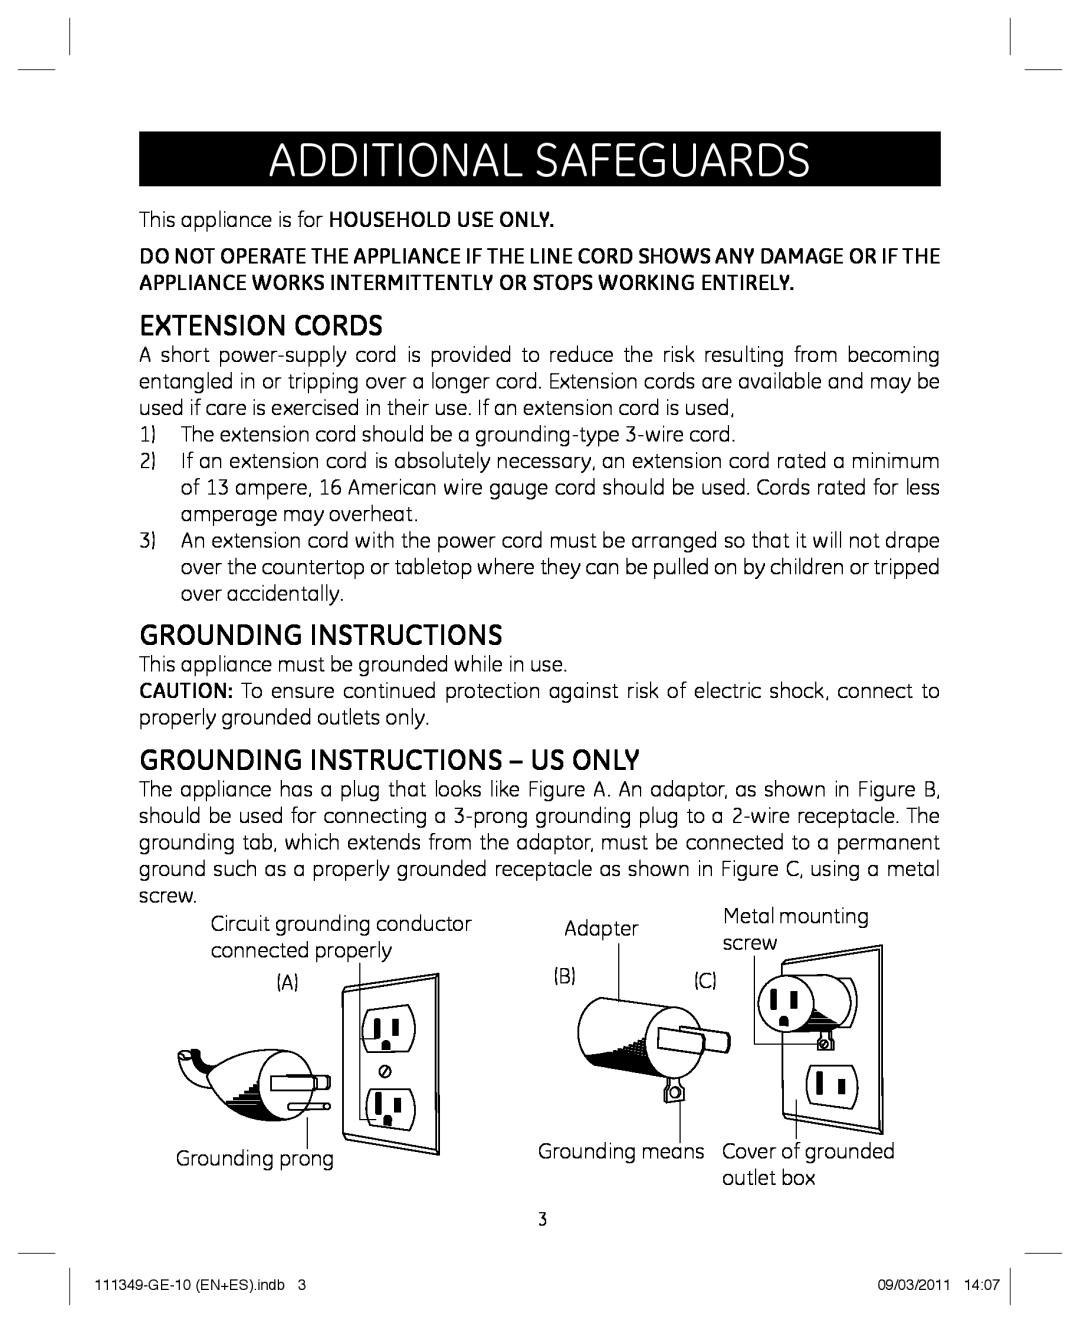 GE 898679 manual Additional SafeguARDS, EXTENSION CORdS, GROUNding INSTRUCTIONS - US ONlY 